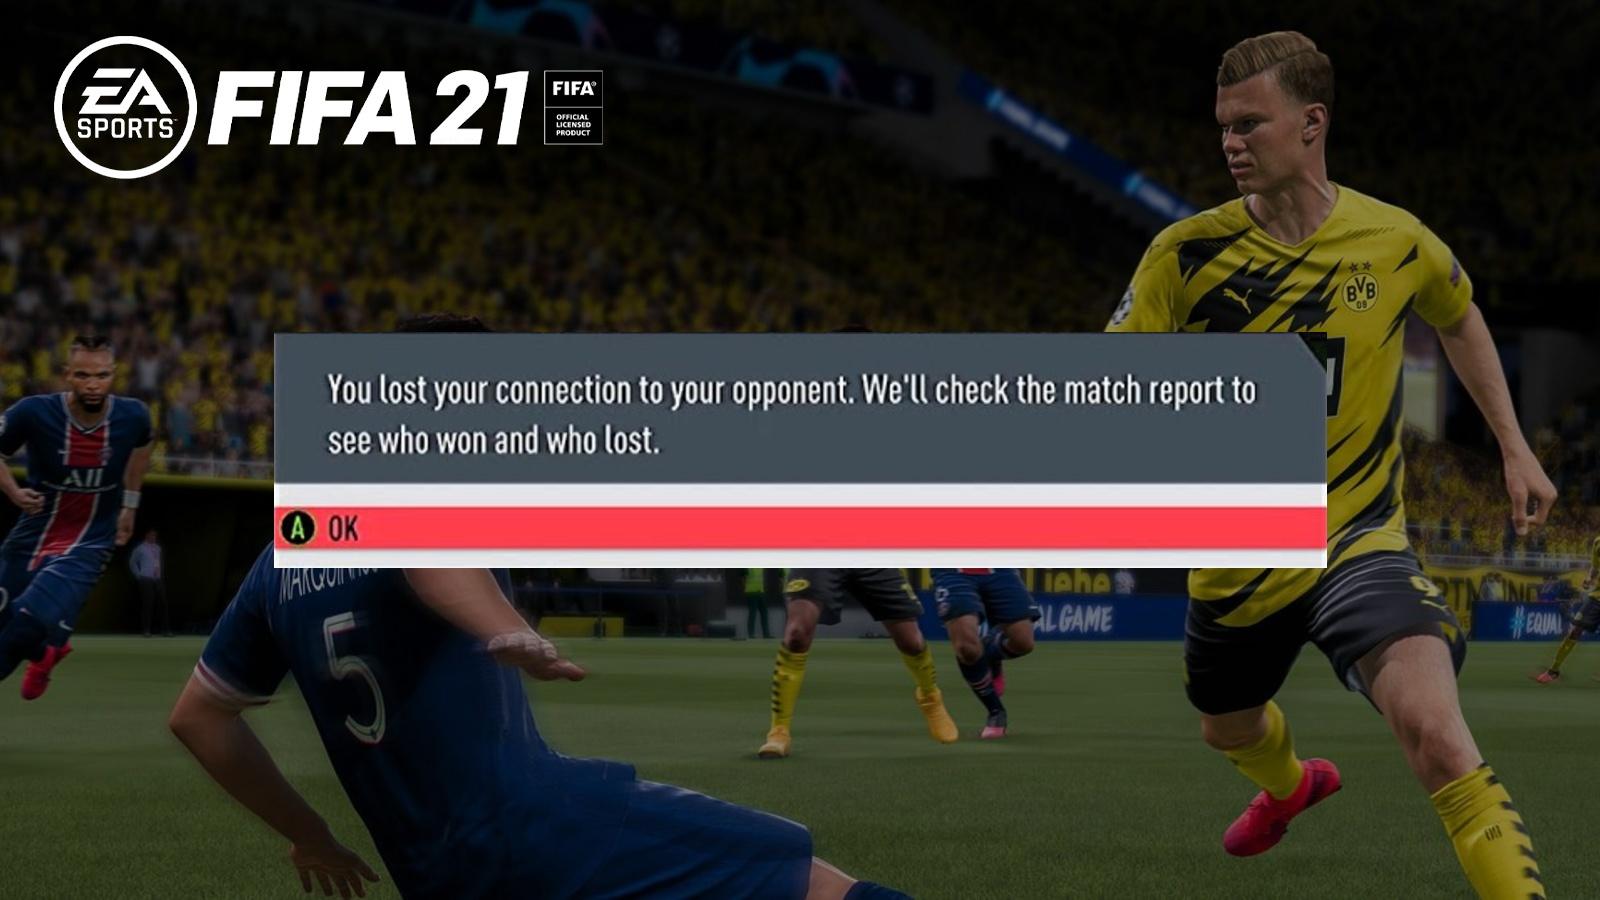 Why people still rage quit even when penalties are involved